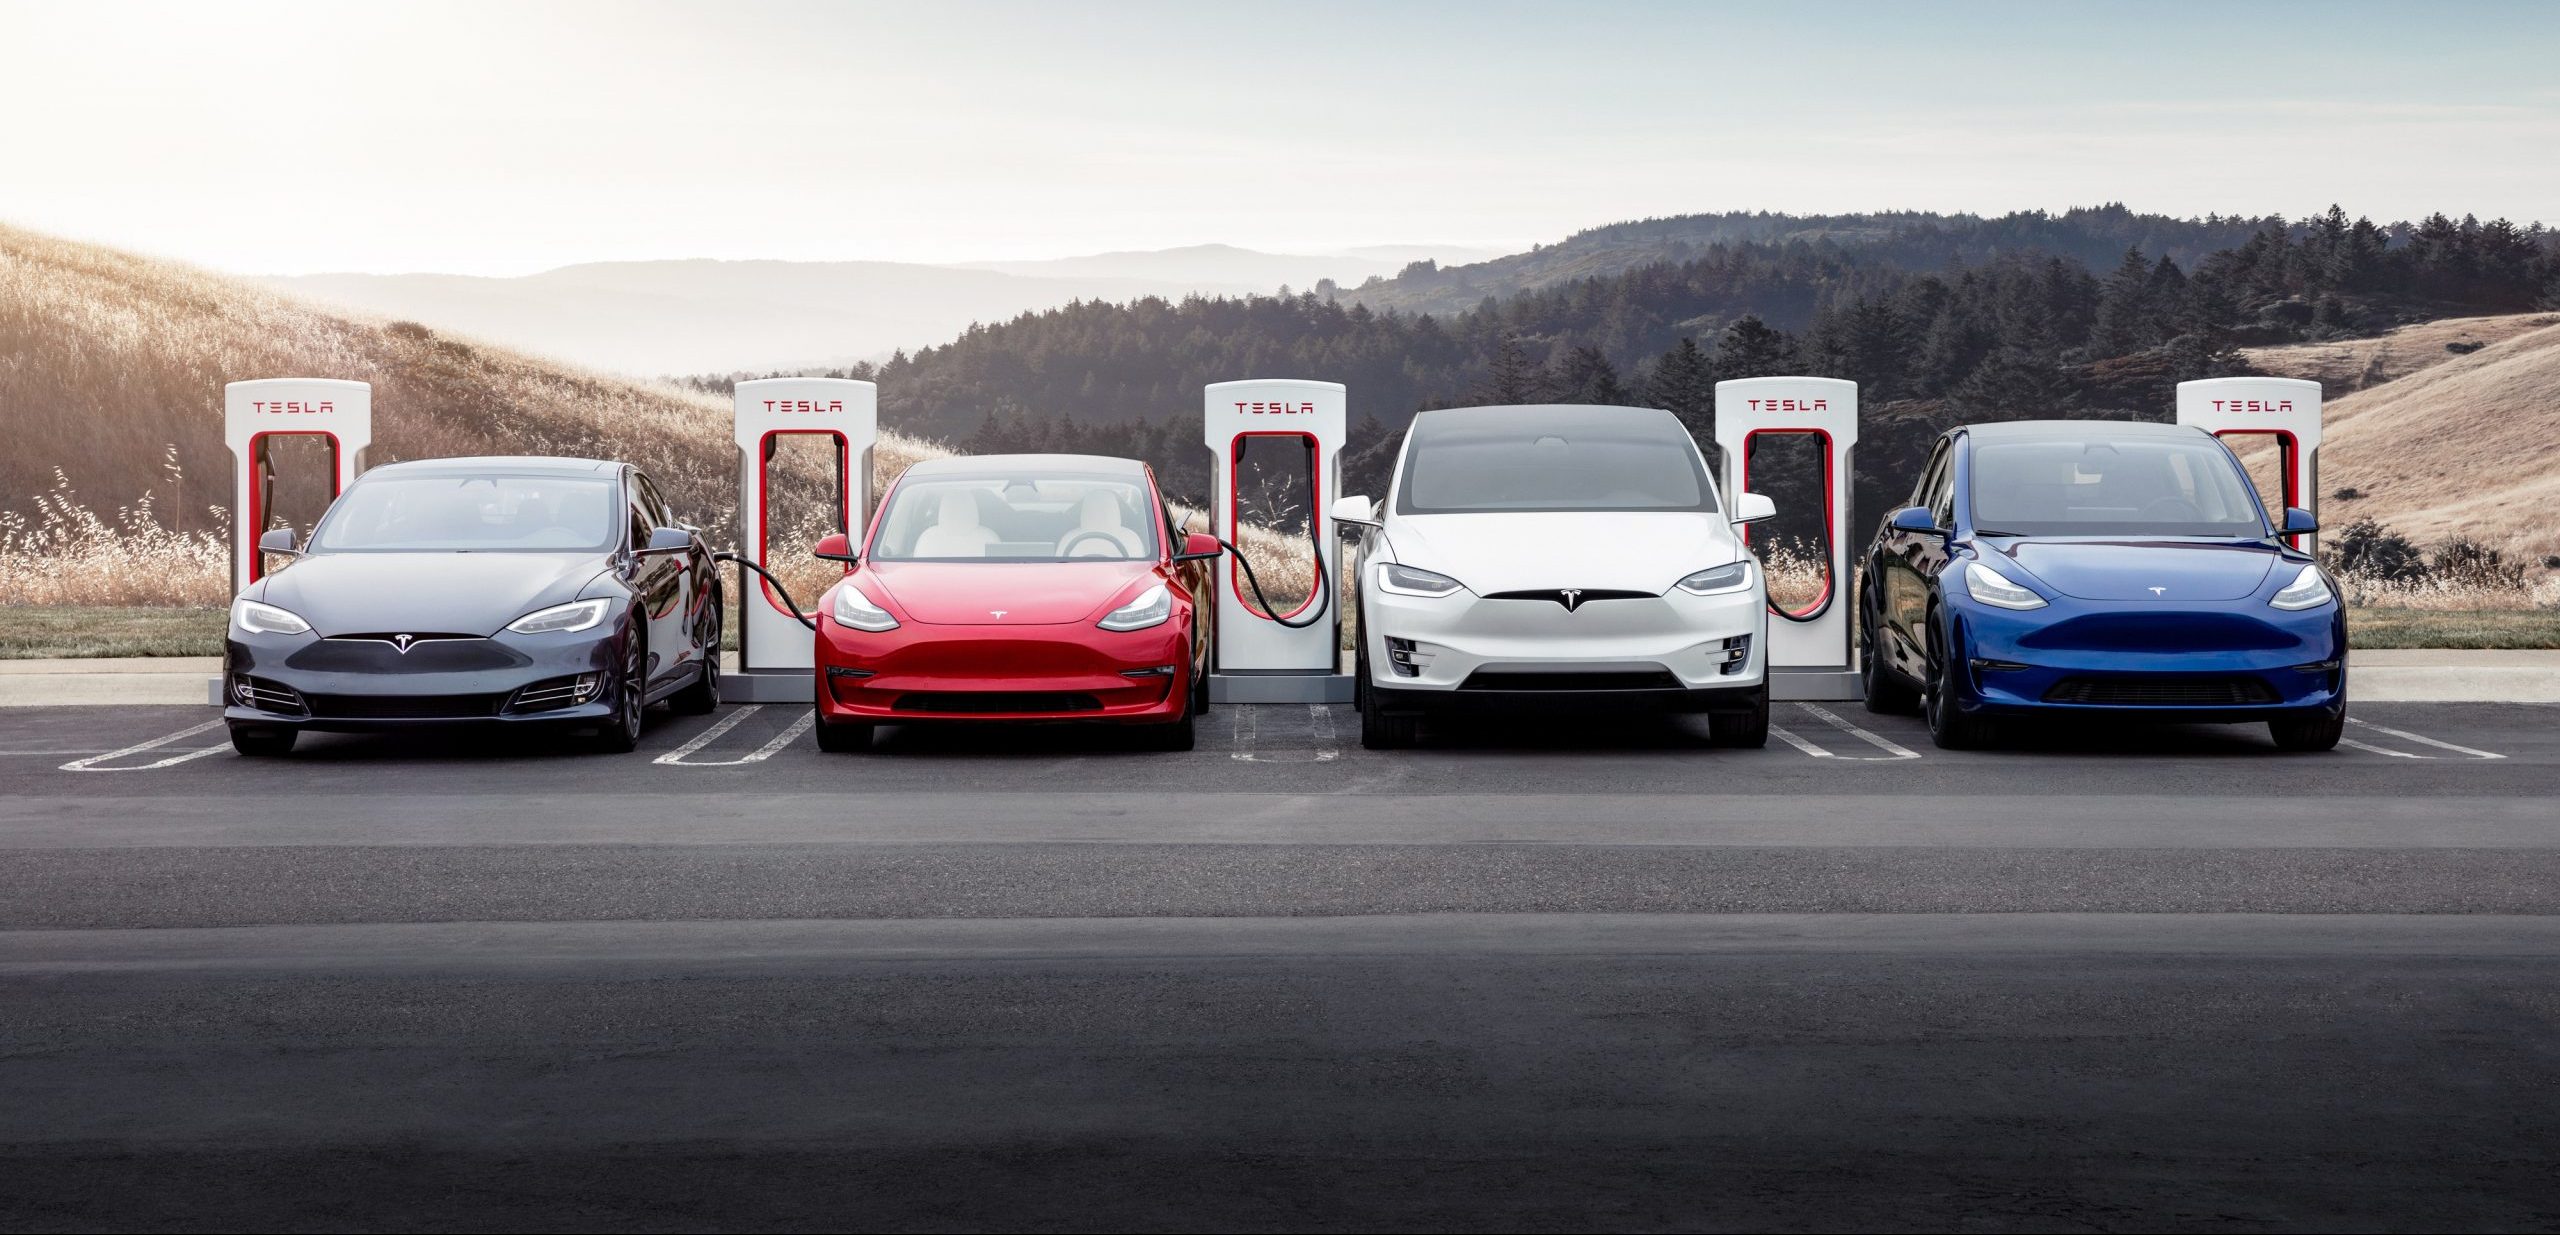 Used Teslas now qualify for $4k tax credit